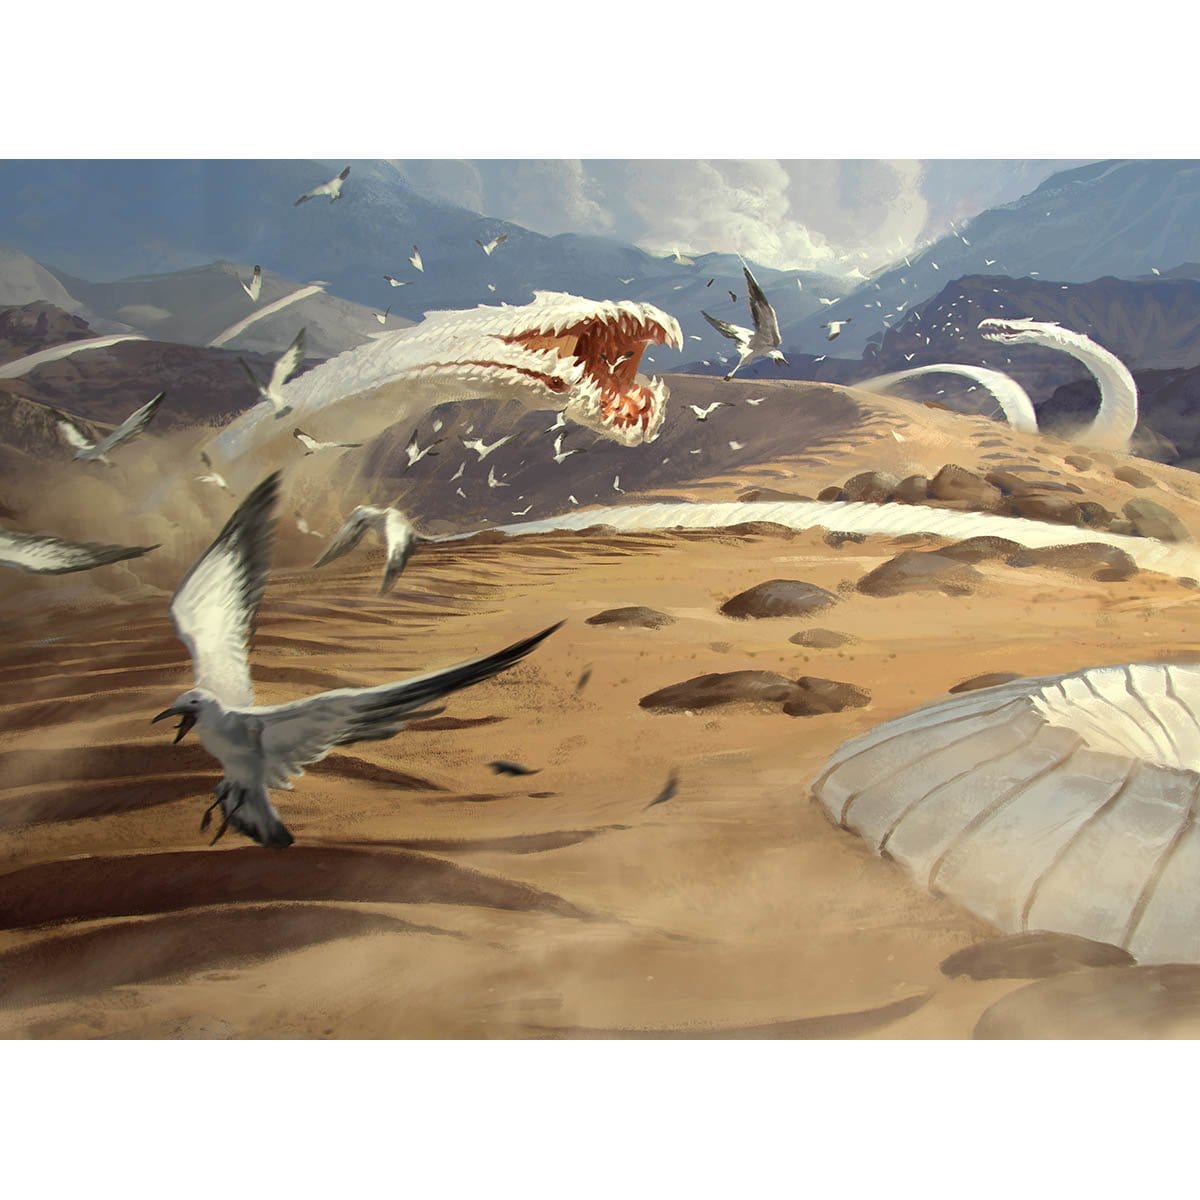 Sandwurm Convergence Print - Print - Original Magic Art - Accessories for Magic the Gathering and other card games